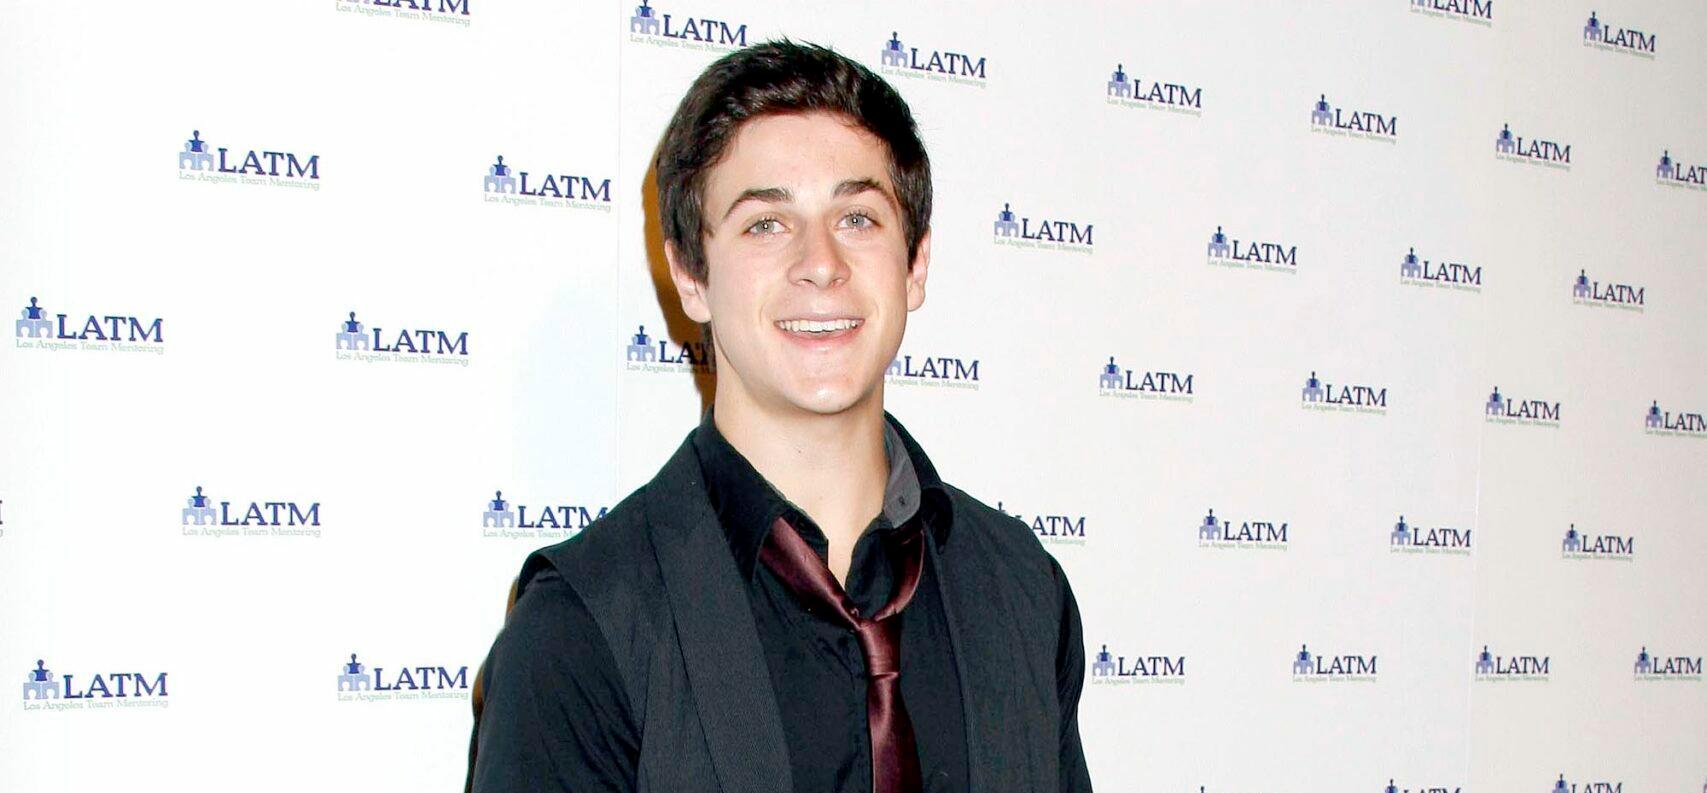 David Henrie On A ‘Wizards Of Waverly Place’ Reboot: ‘It’d Be So Fun’